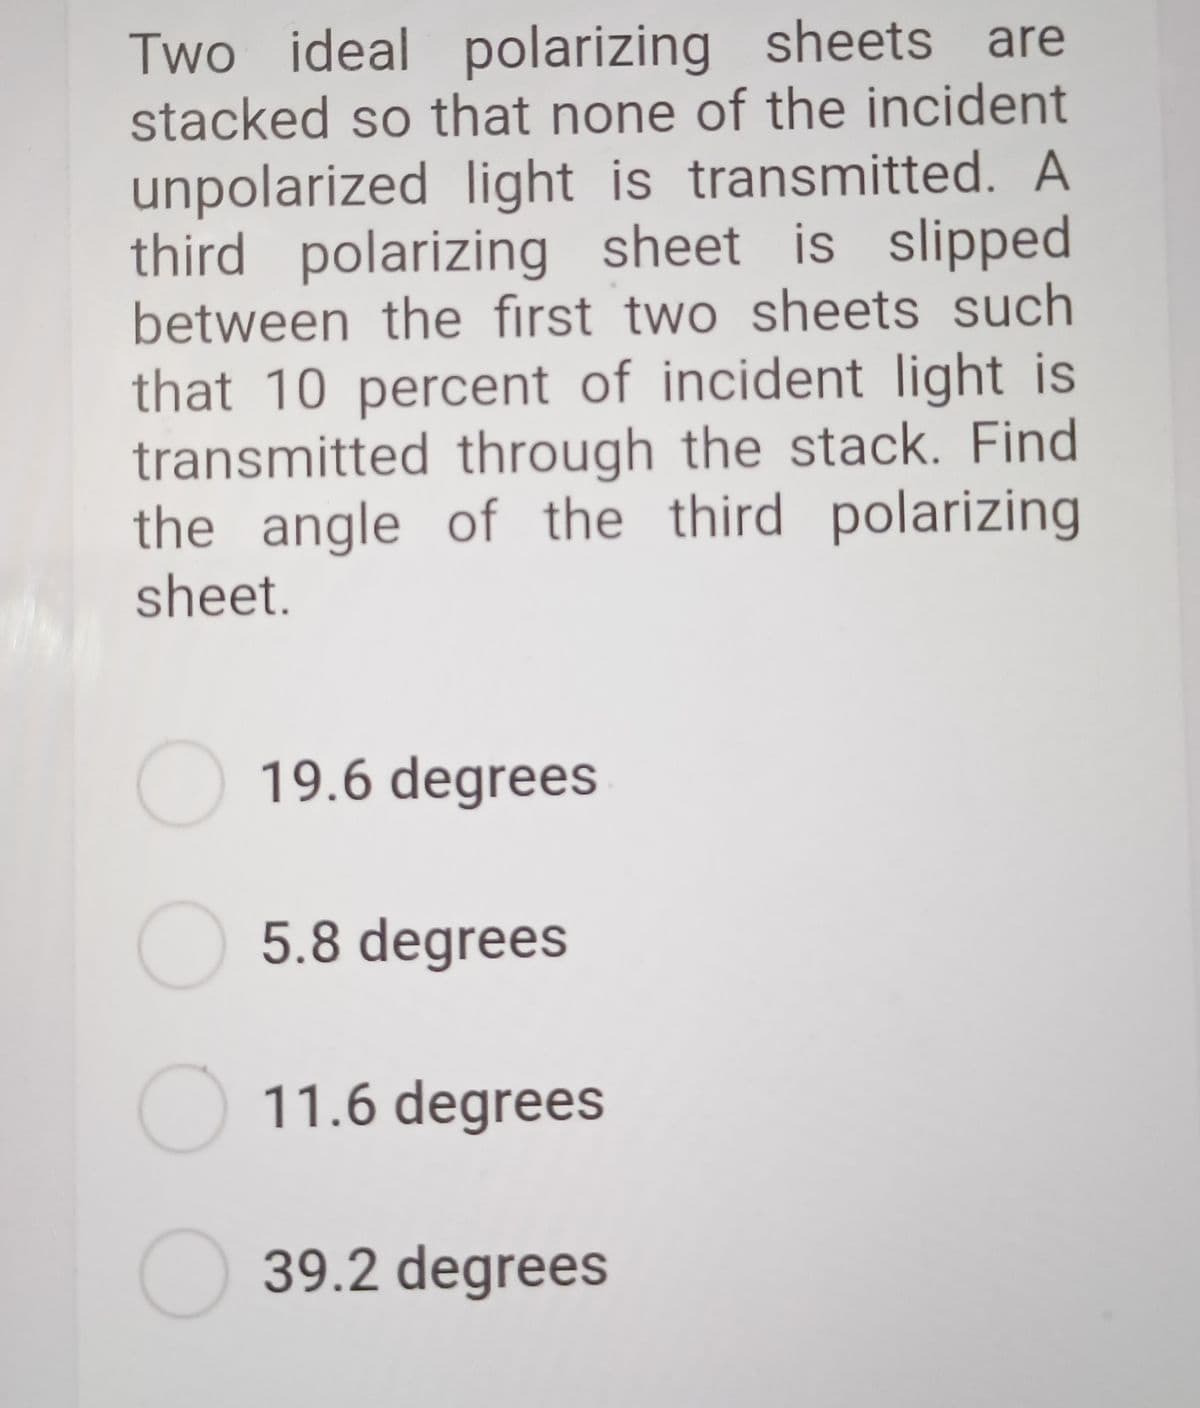 Two ideal polarizing sheets are
stacked so that none of the incident
unpolarized light is transmitted. A
third polarizing sheet is slipped
between the first two sheets such
that 10 percent of incident light is
transmitted through the stack. Find
the angle of the third polarizing
sheet.
19.6 degrees
O 5.8 degrees
O 11.6 degrees
O 39.2 degrees
